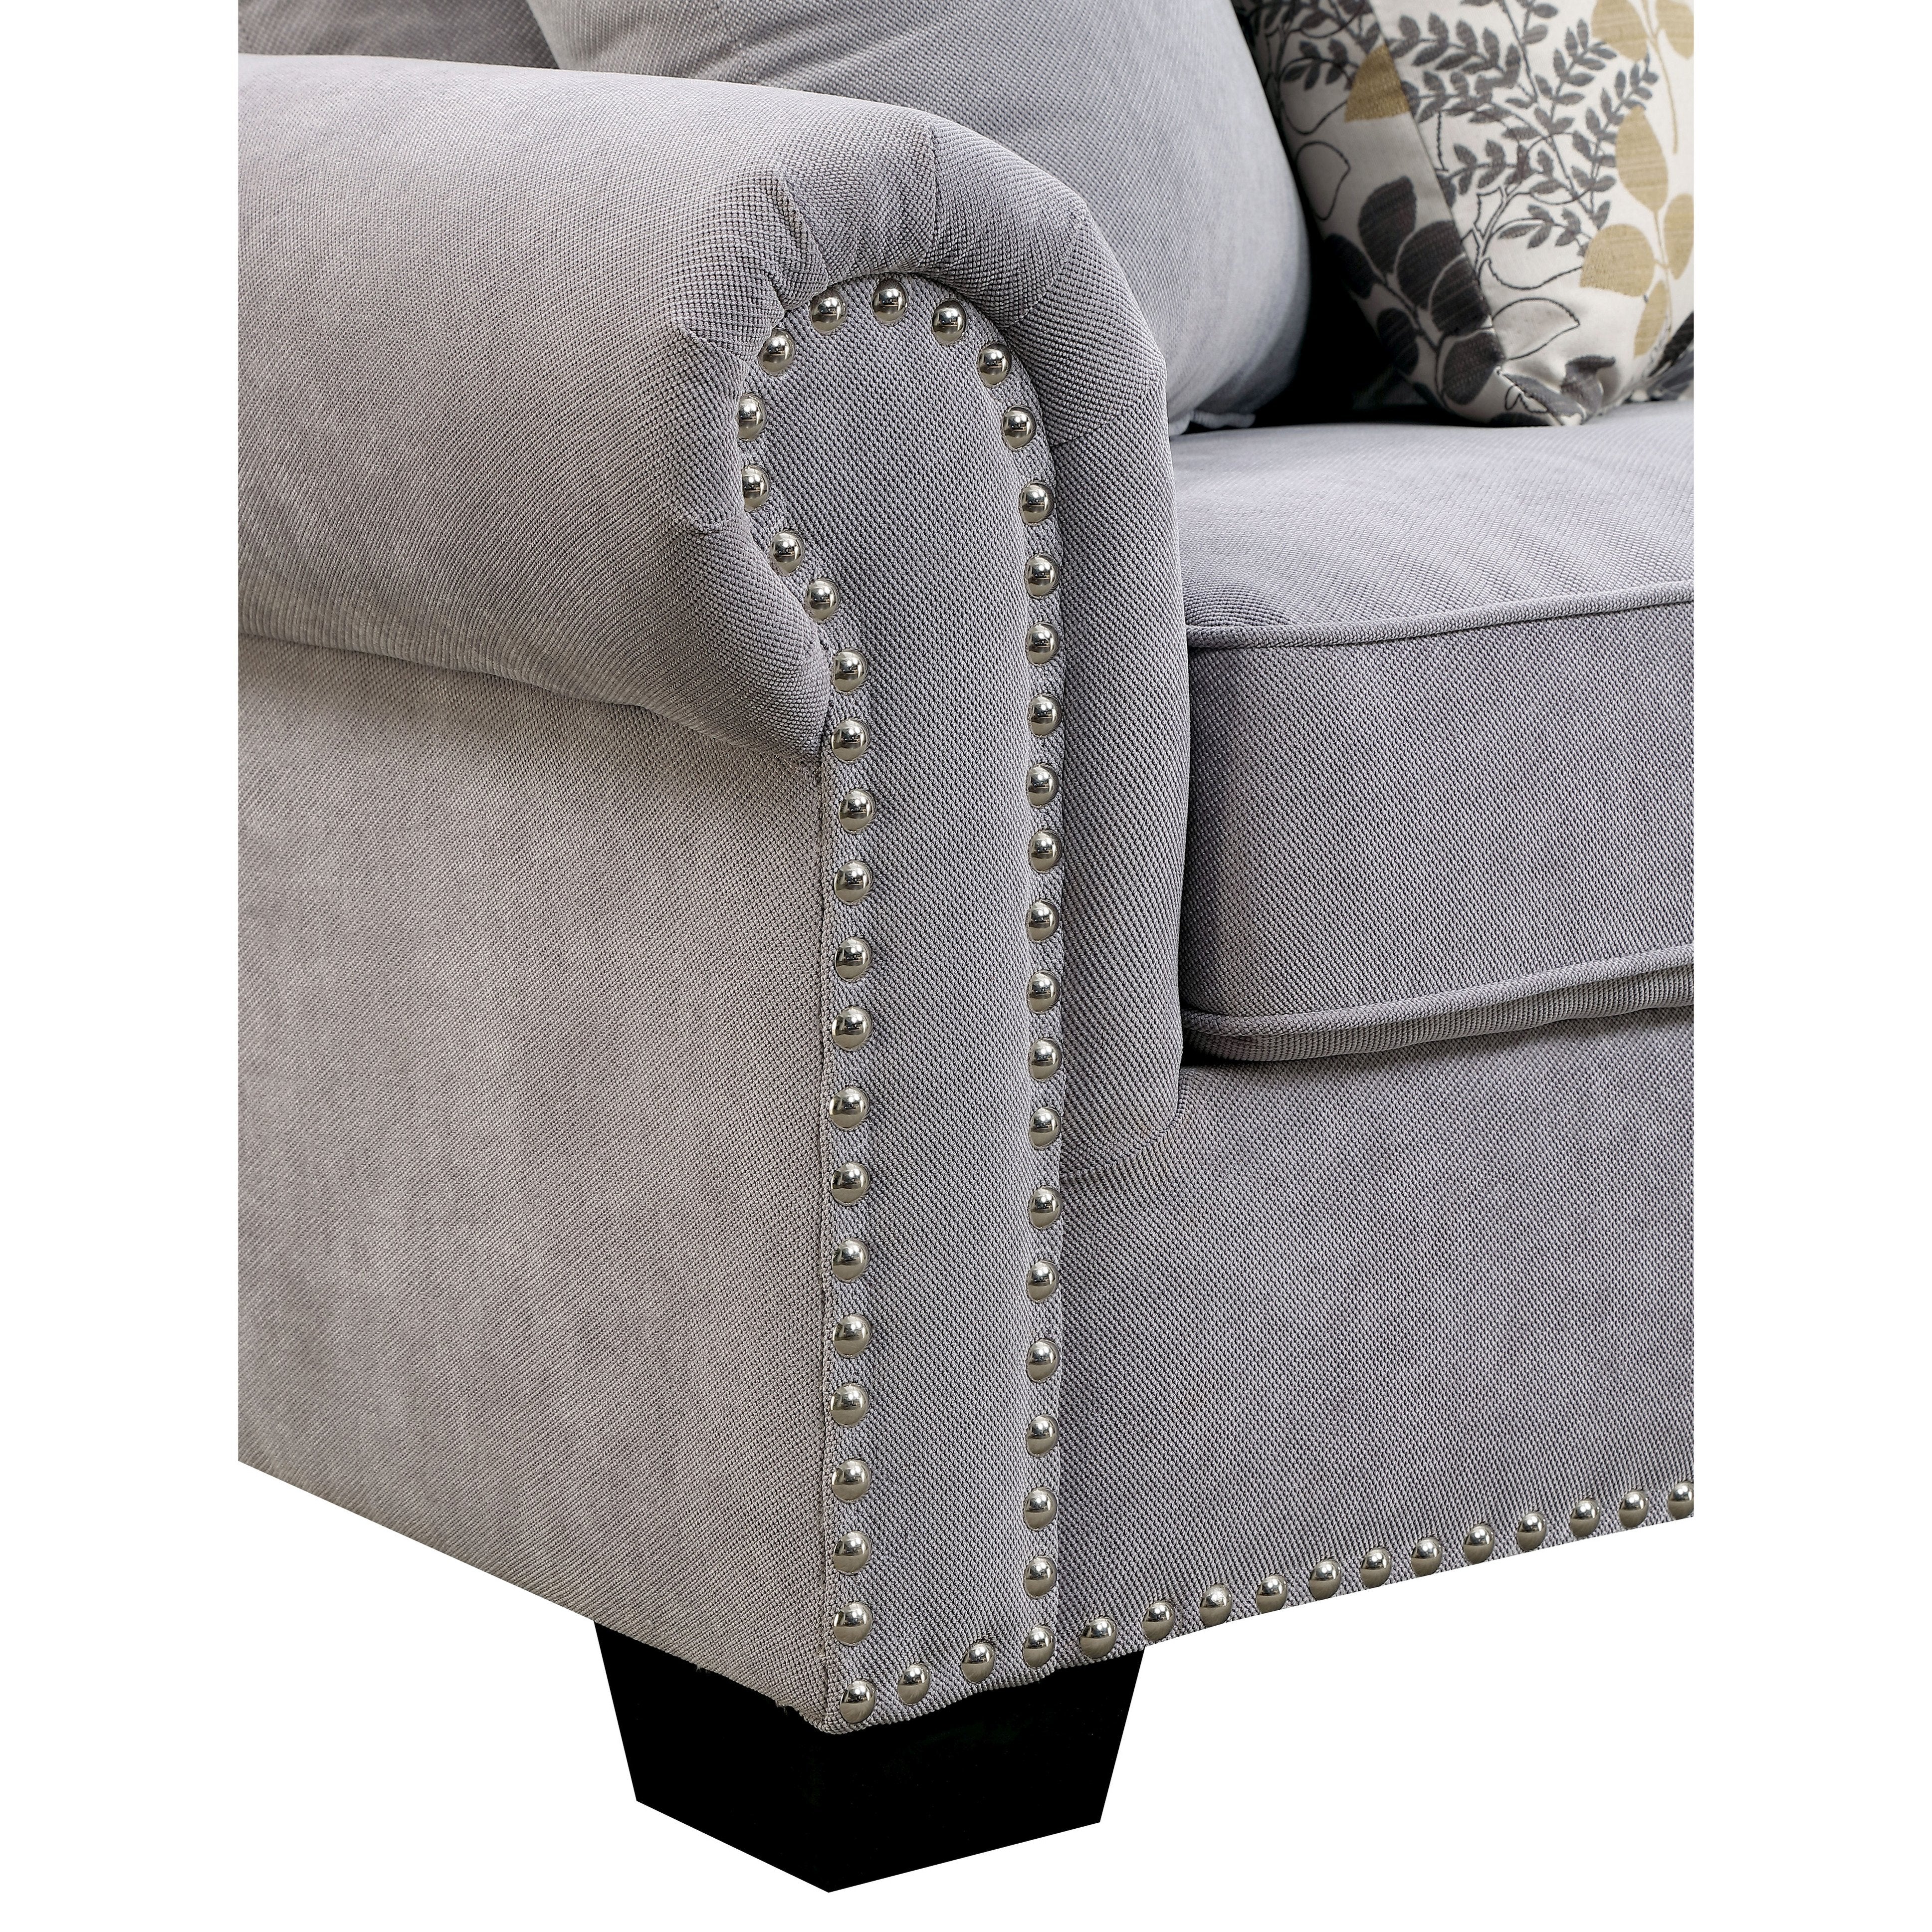 Nylah Transitional Fabric Padded Chaise Sectional-sectional-Furniture of America-Wall2Wall Furnishings